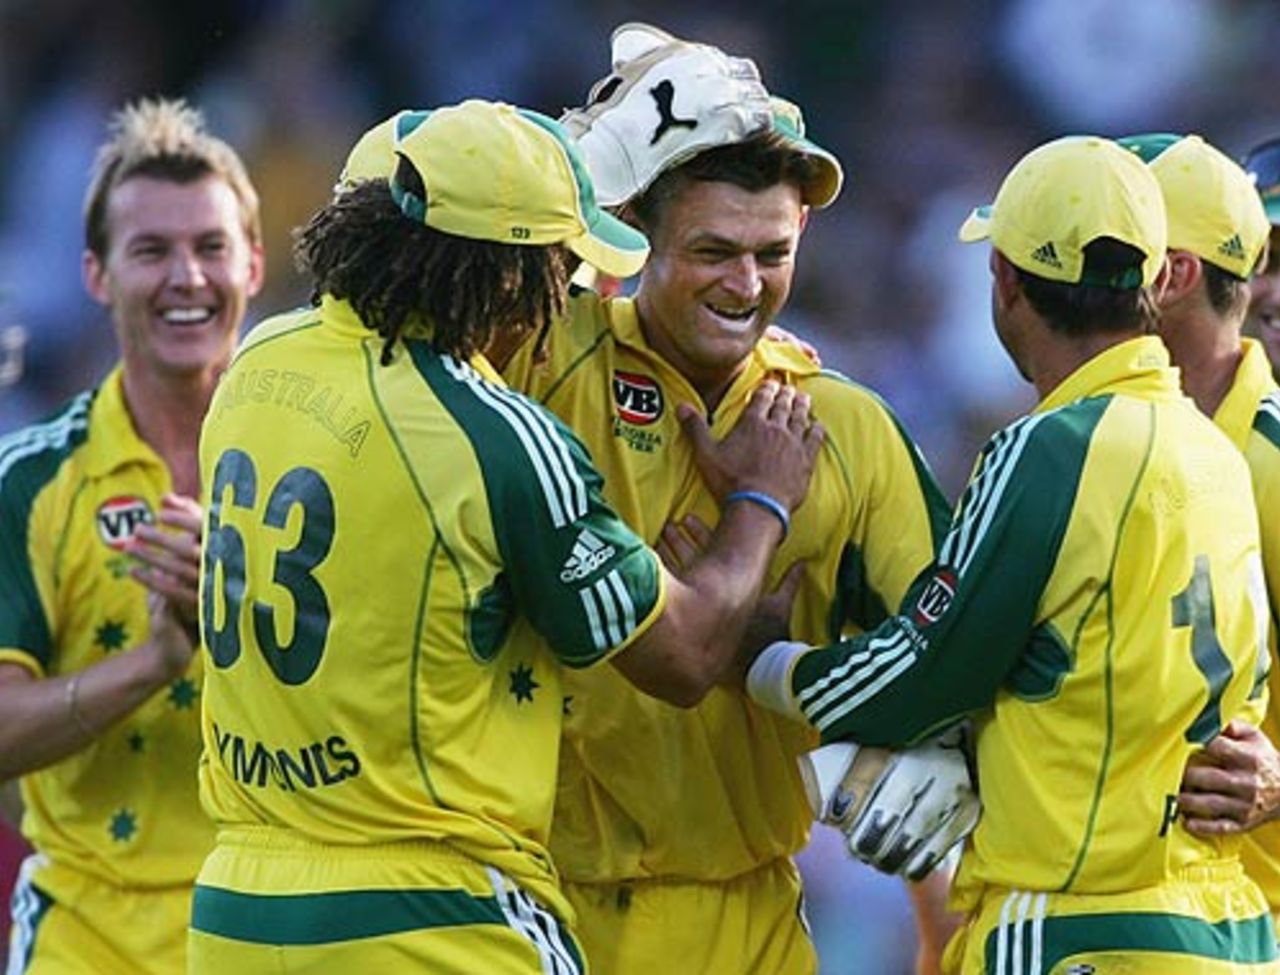 Adam Gilchrist is congratulated on a brilliant take to dismiss Graeme Smith, Australia v South Africa, VB Series, Sydney, February 5, 2006